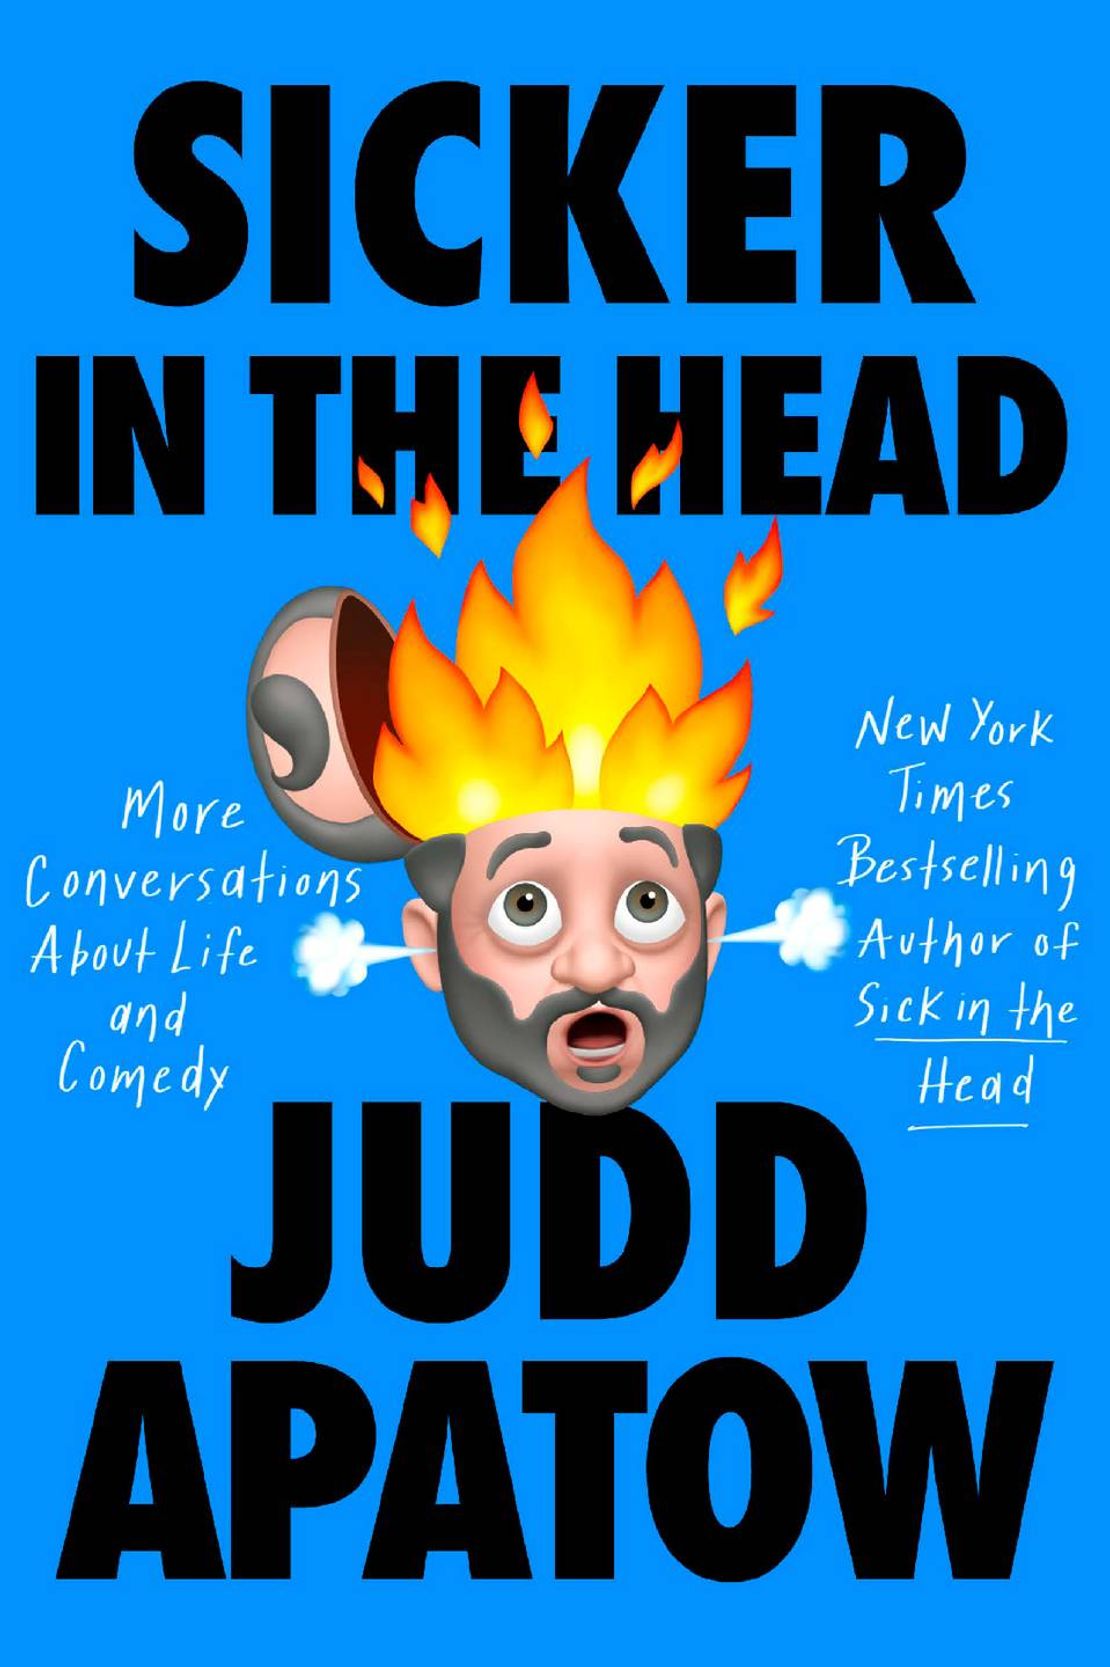 Book cover of "Sicker in the Head" by Judd Apatow. Next Avenue